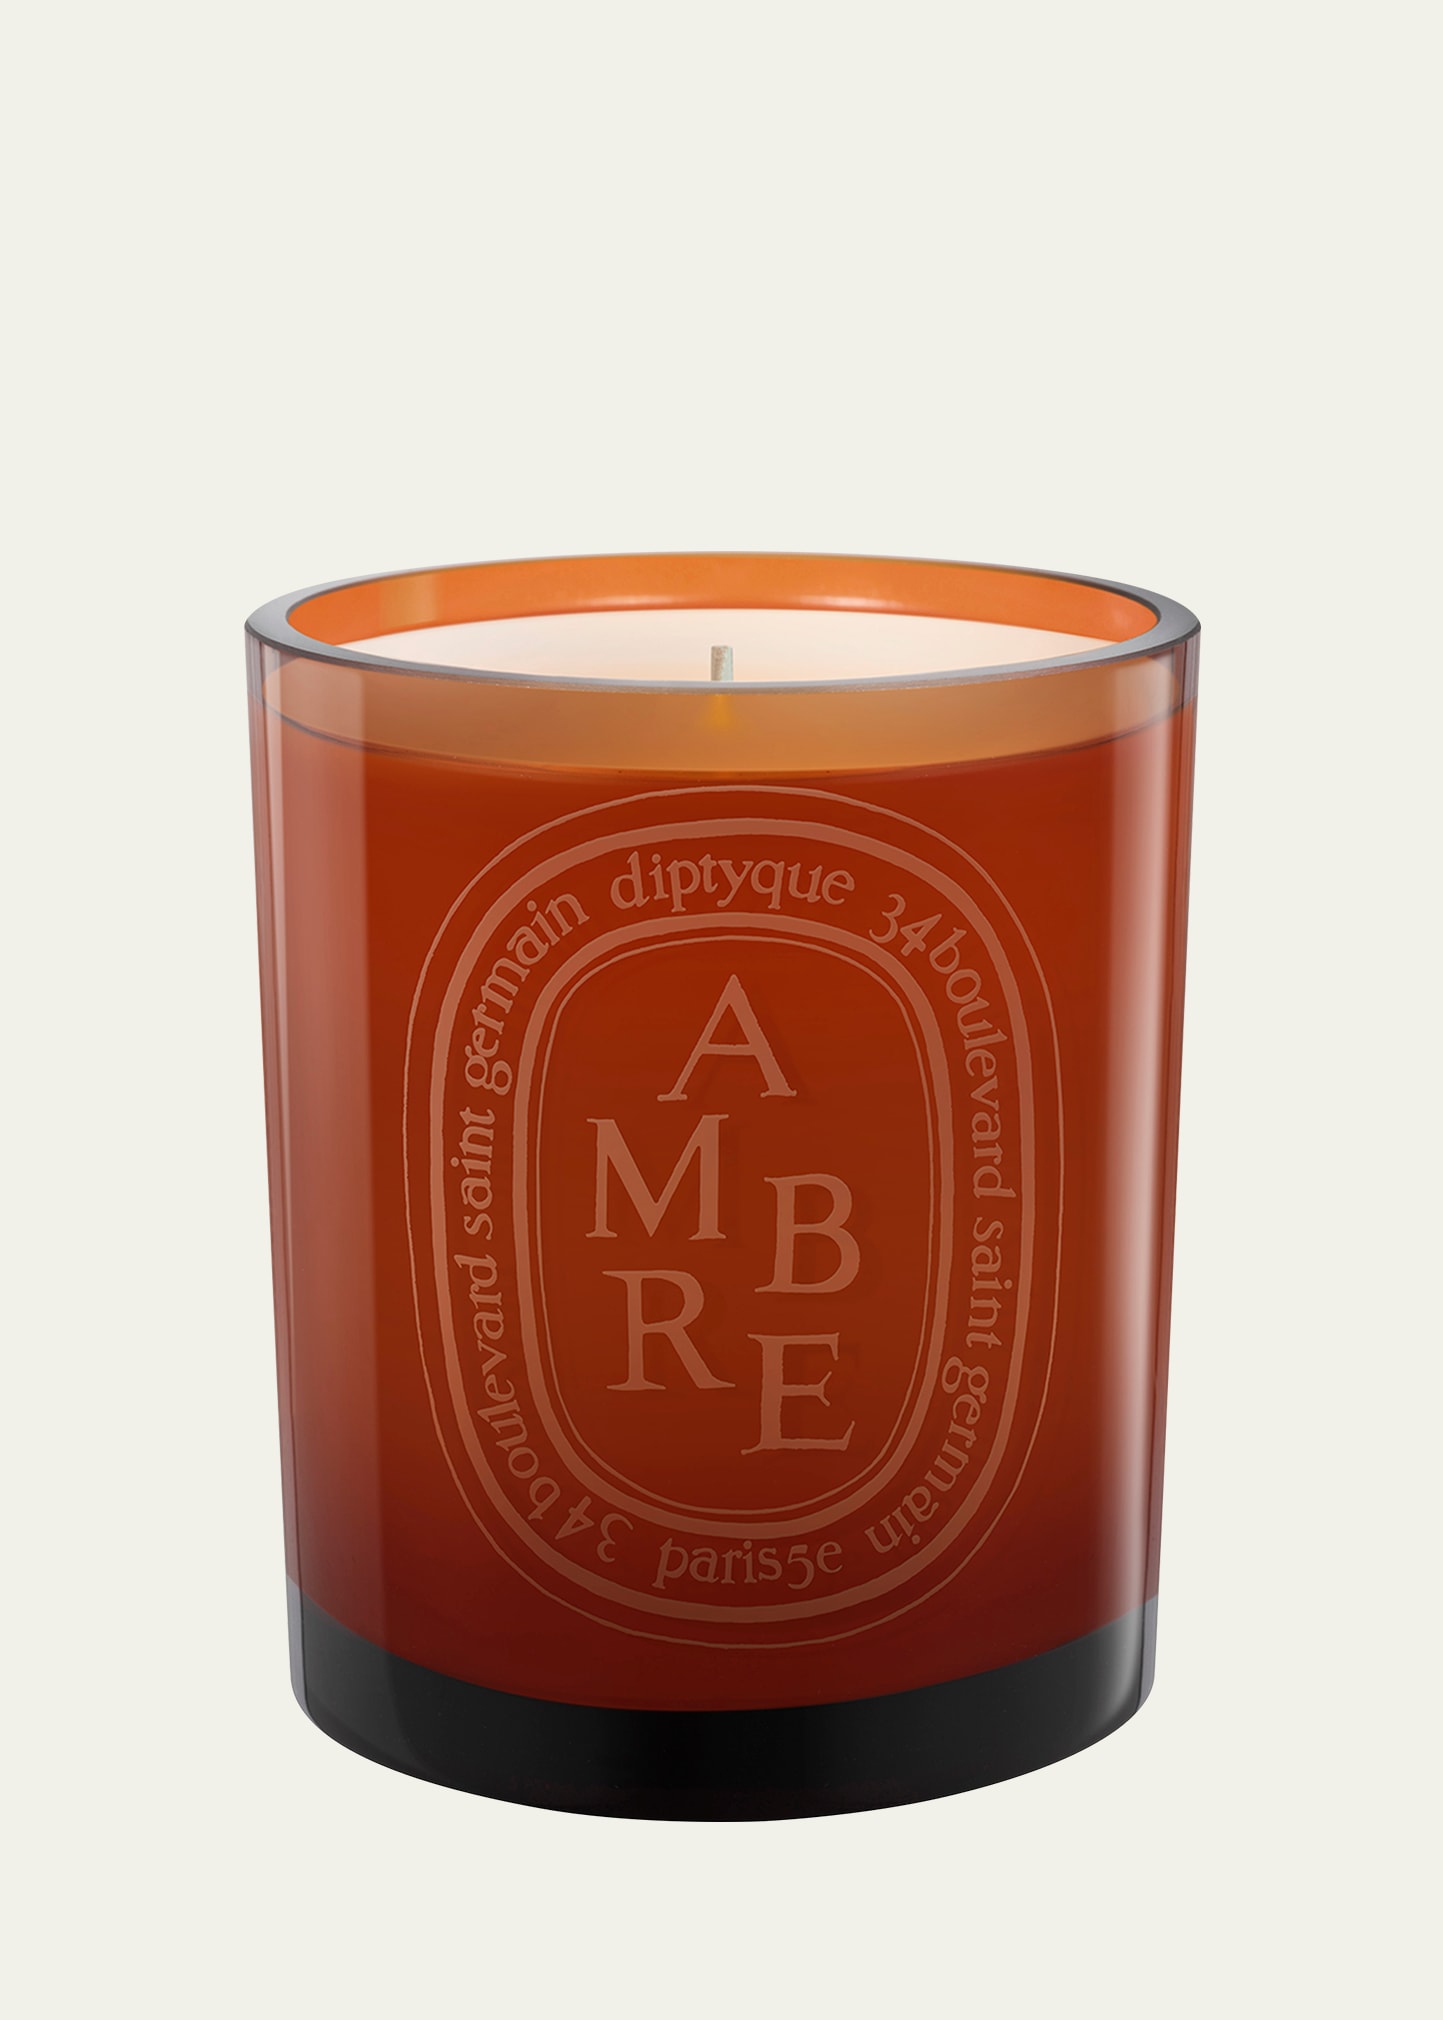 DIPTYQUE Ambre (Amber) Scented Candle, 10.2 oz.